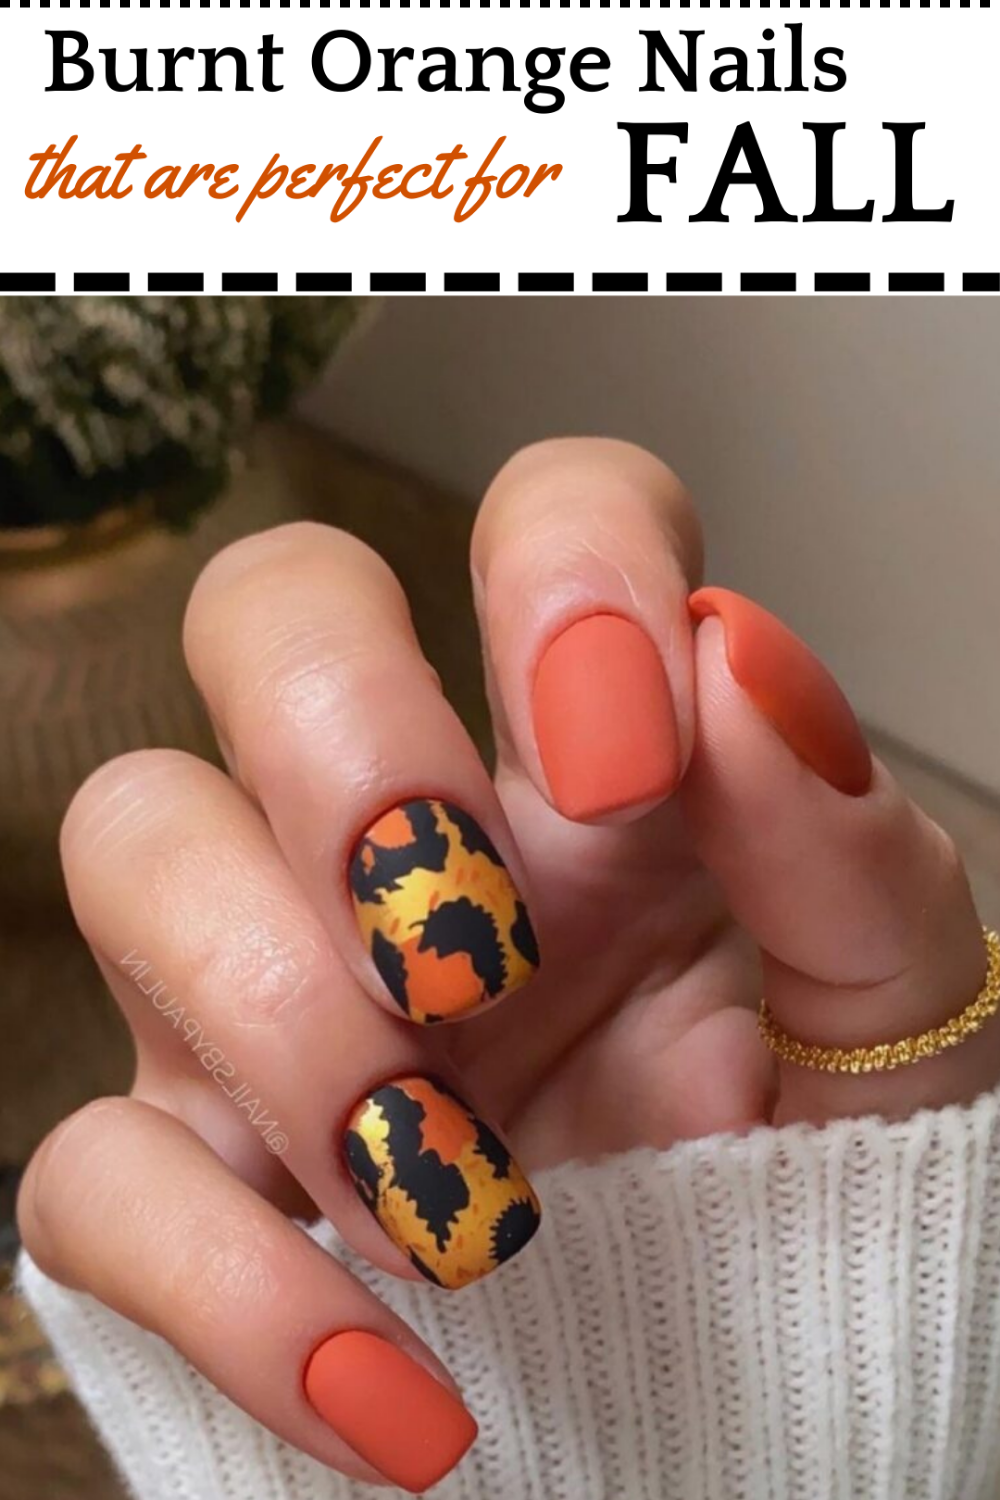 Burnt Orange Nails That Are Perfect for Fall